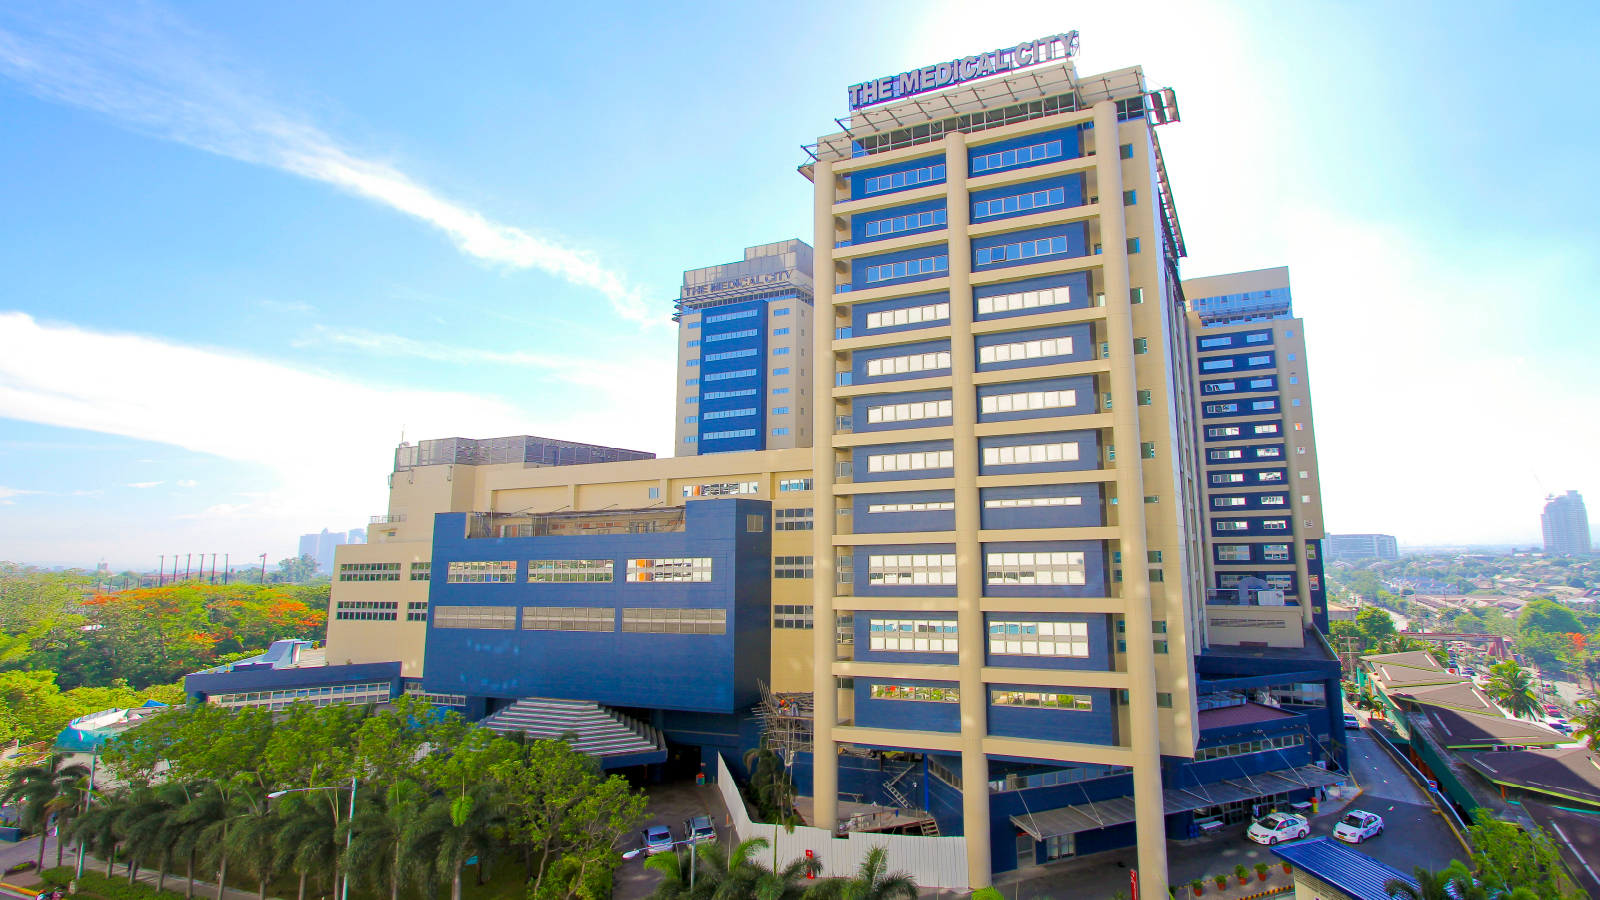 A outside look of the Medical City building